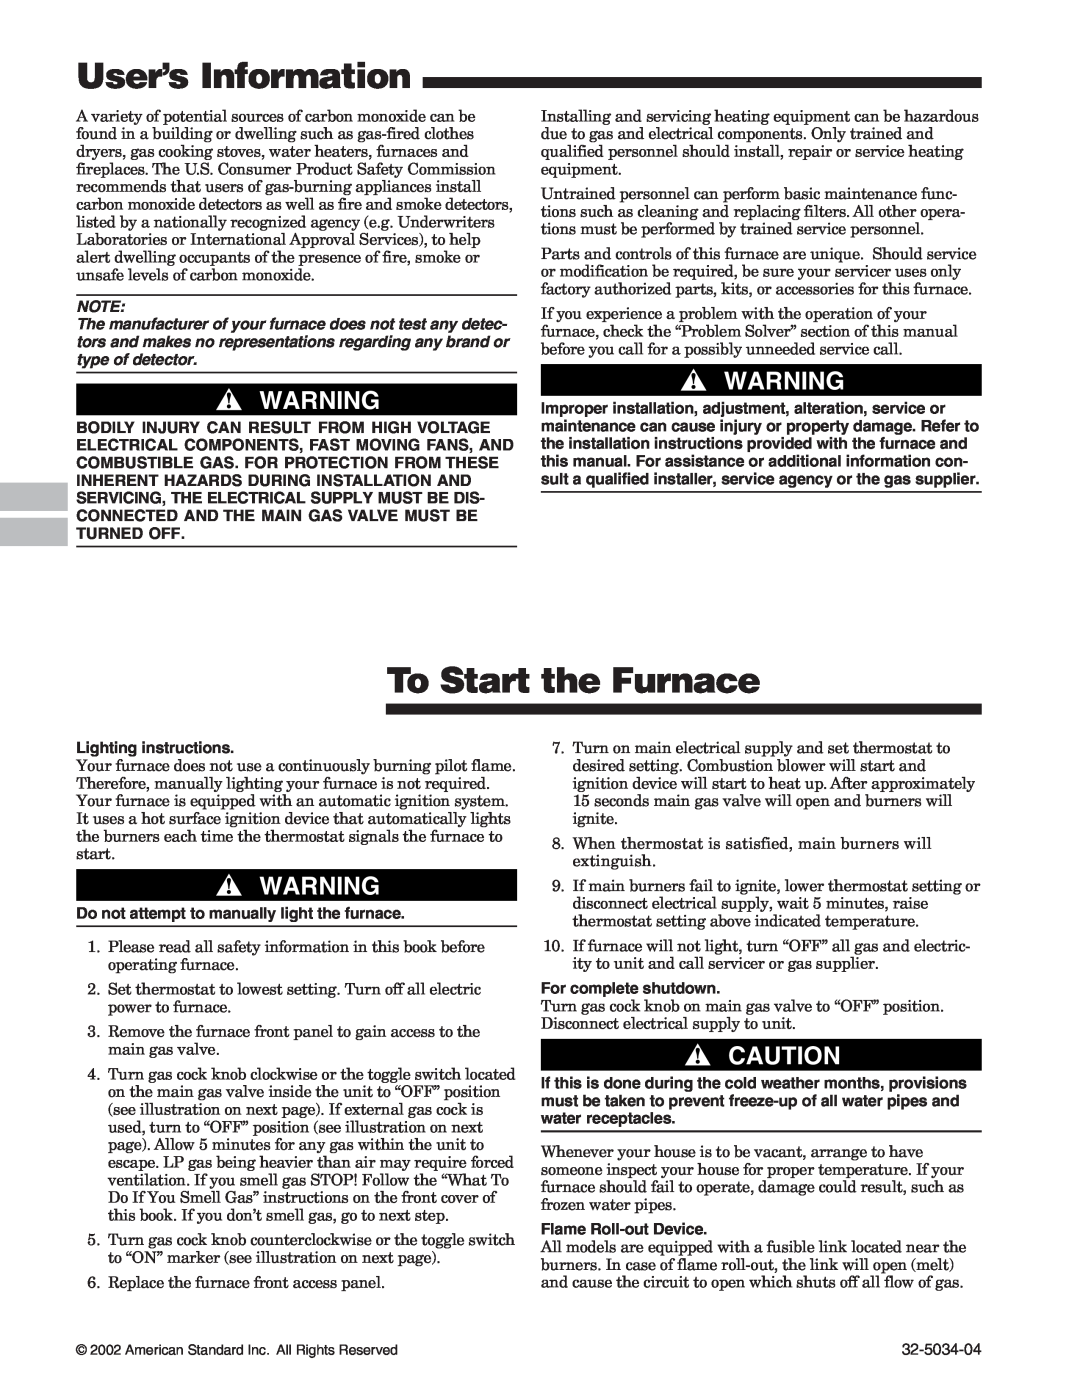 American Standard Gas Furnaces User’s Information, To Start the Furnace, Lighting instructions, For complete shutdown 